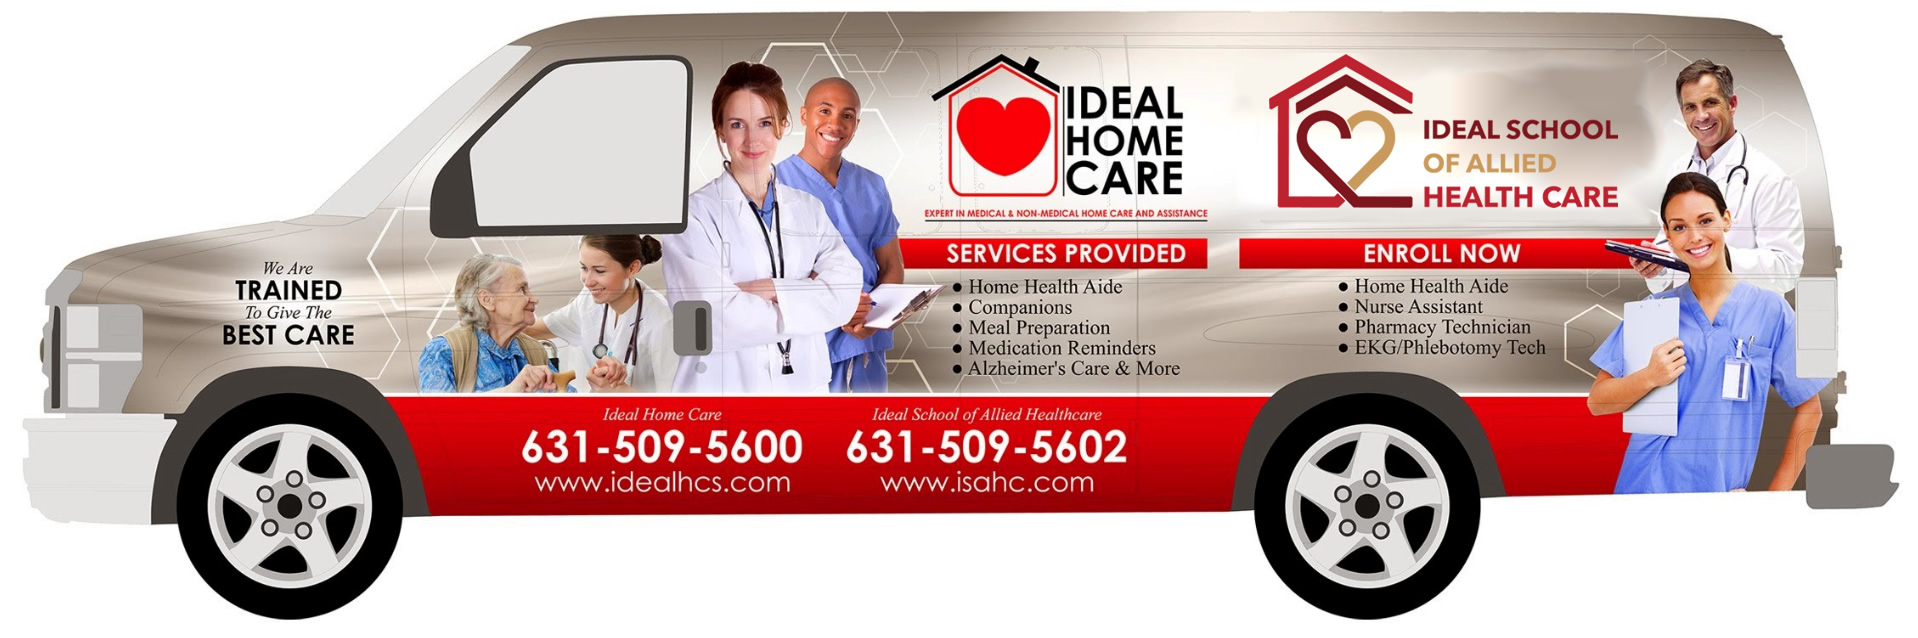 Home Ideal School Of Allied Health Care